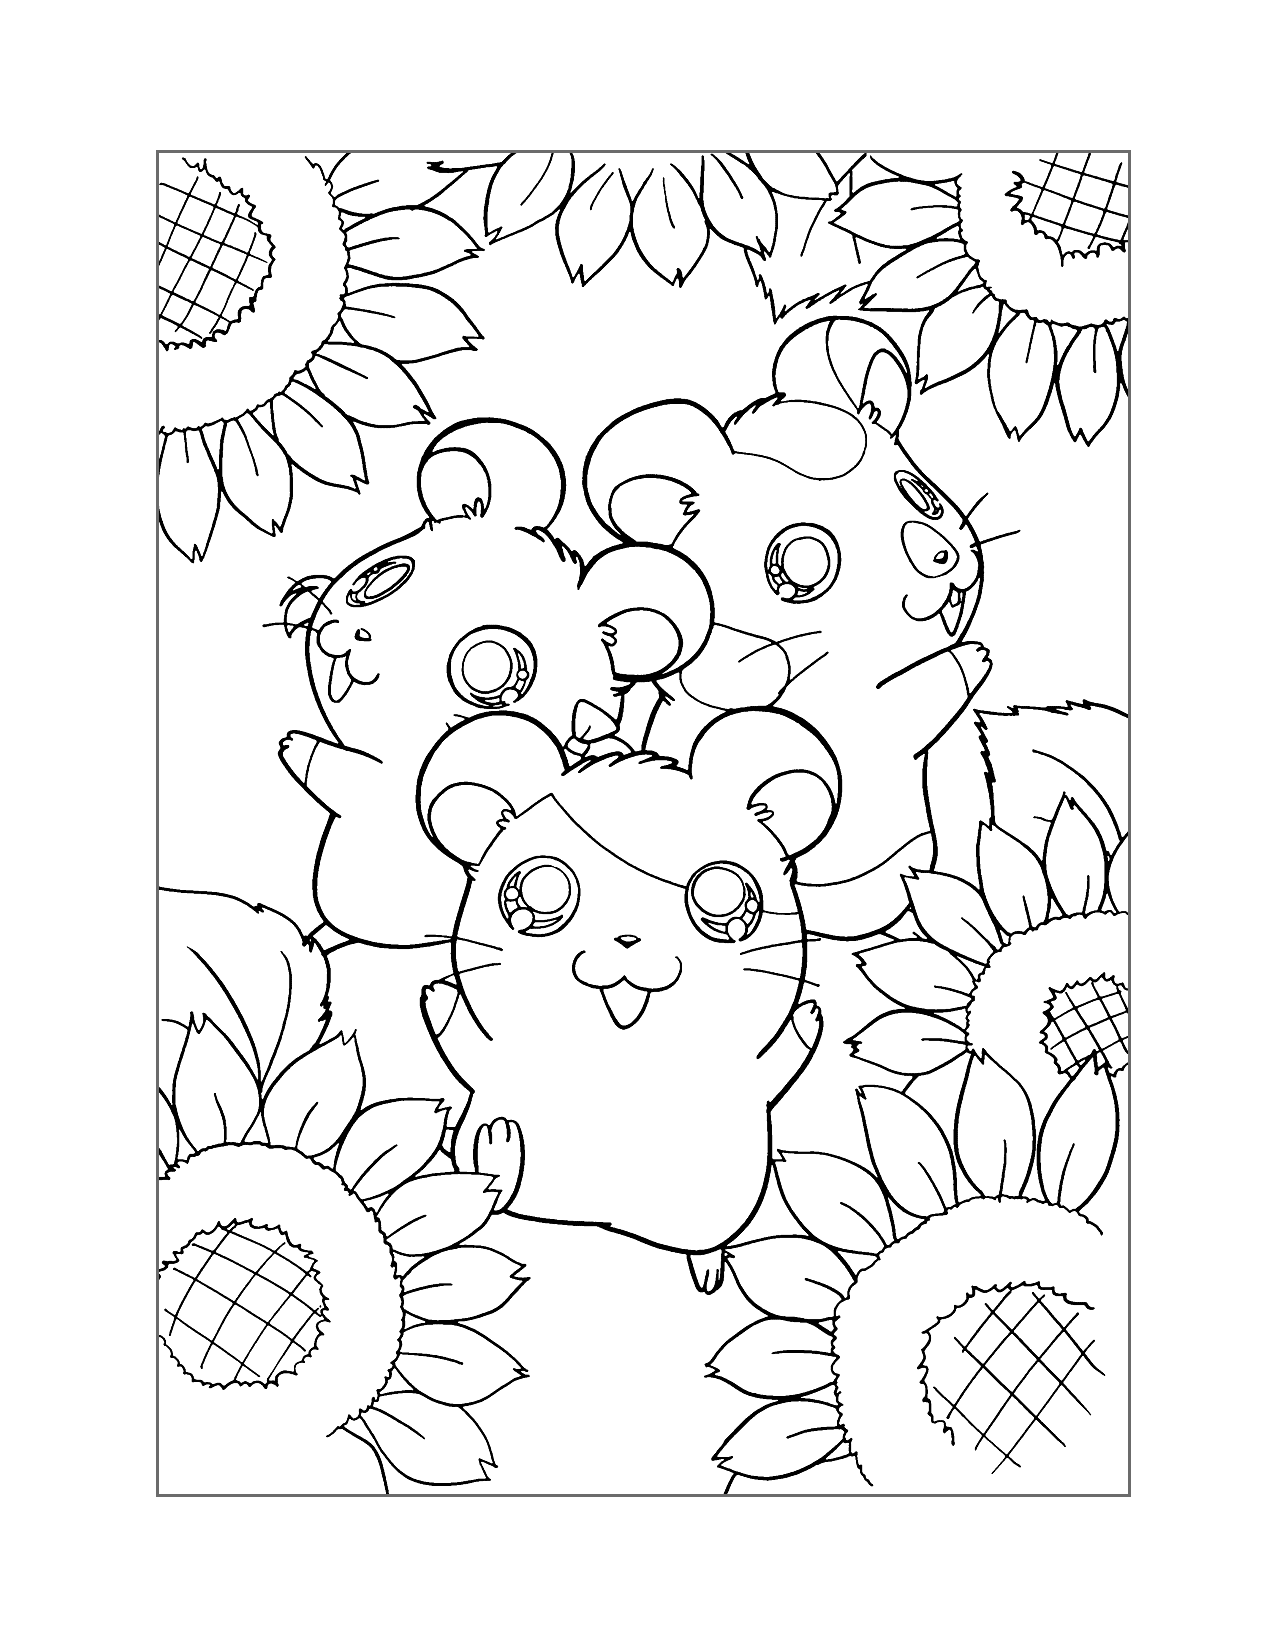 Hamtaro Dancing In Sunflowers Coloring Page